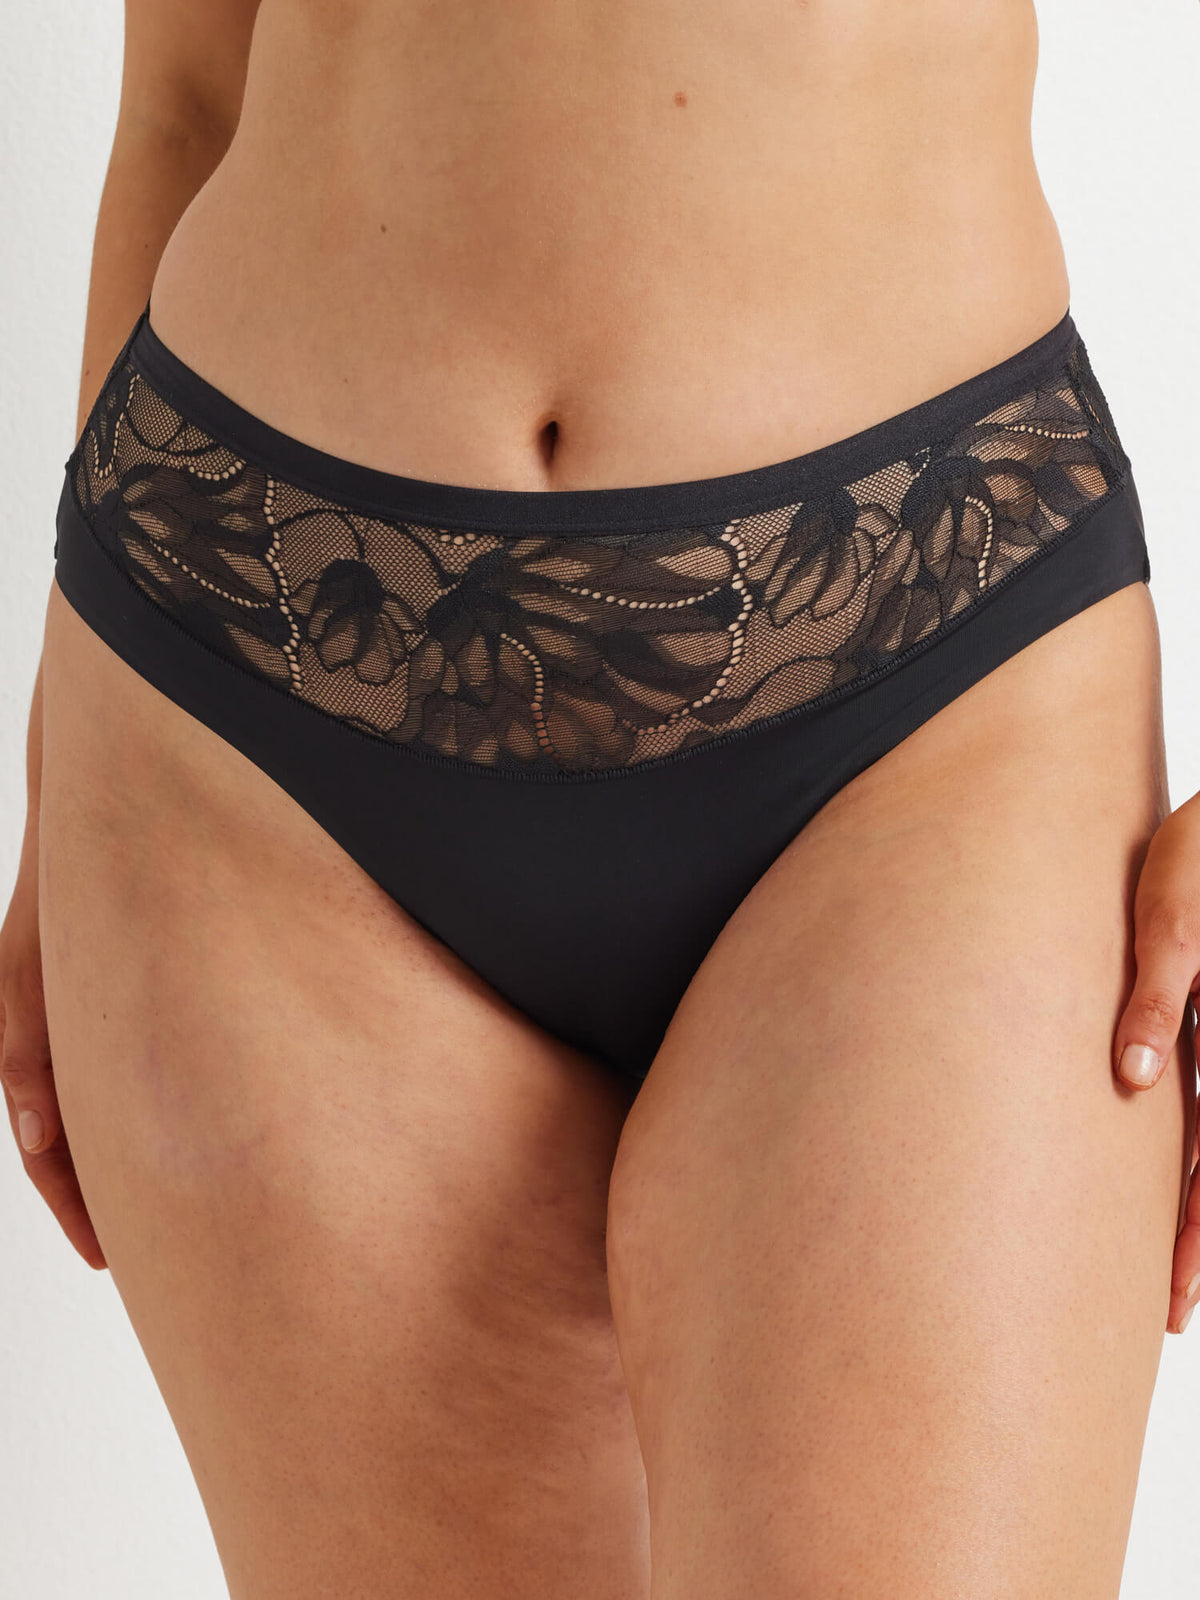 Smooth All Over Lace Hi Cut Underwear in Black - Kayser Lingerie